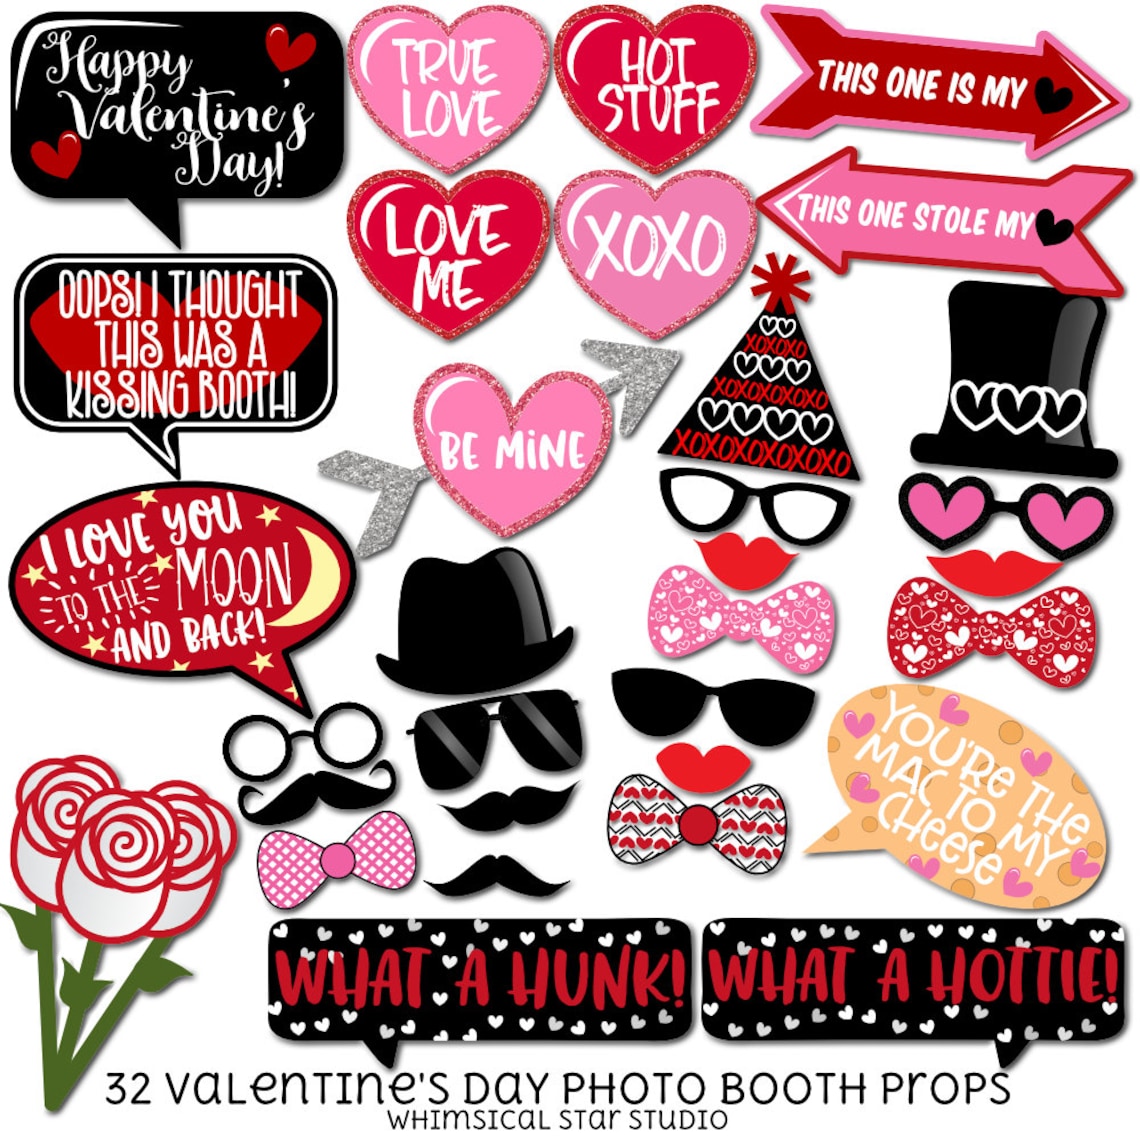 Valentine's Day Photo Booth Props 32 Printable Props | Etsy